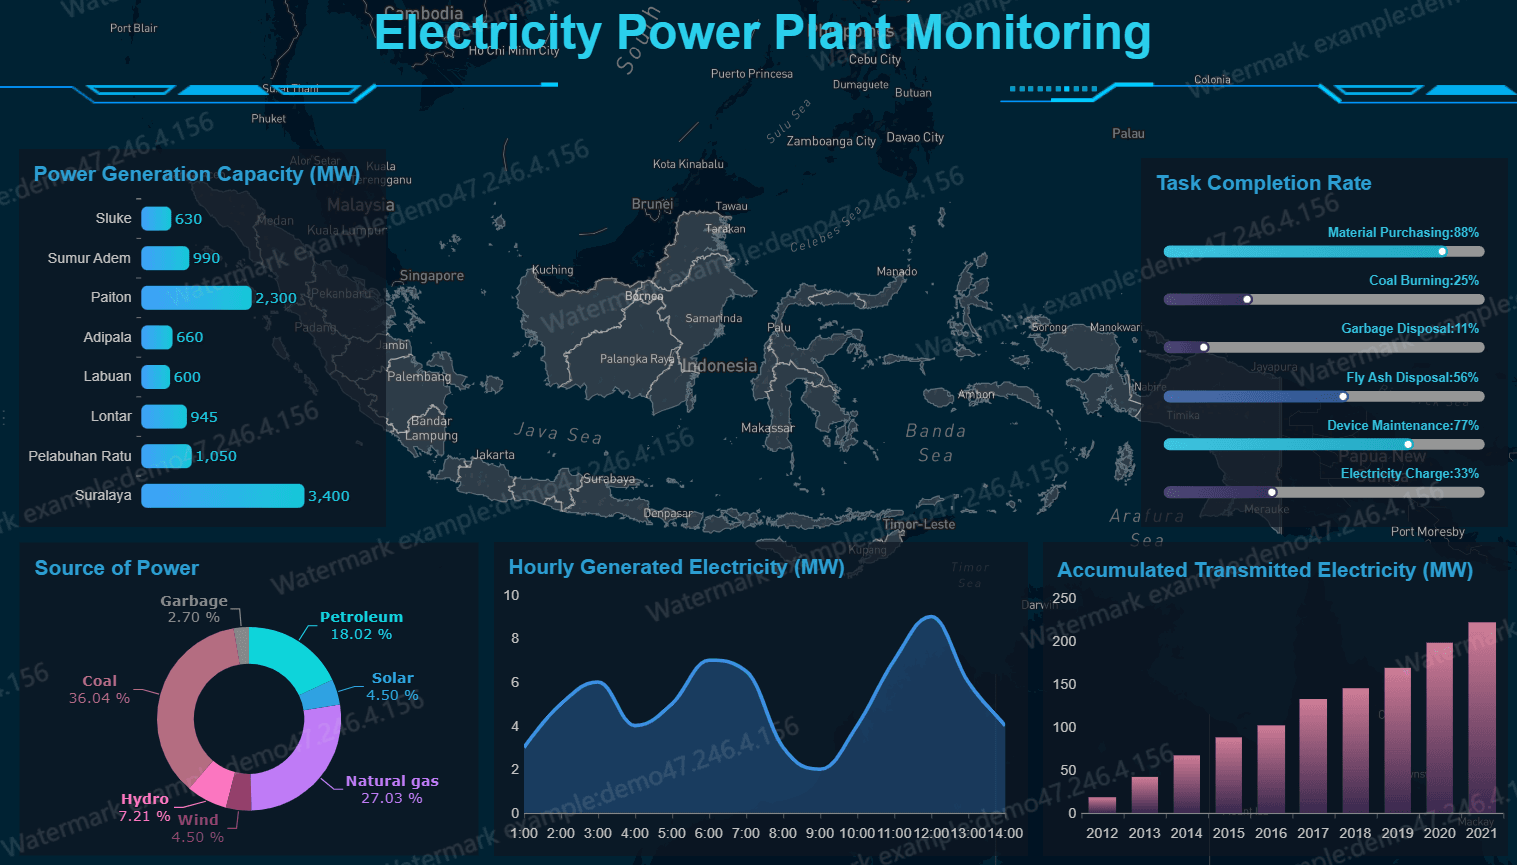 Electricity Power Plant Monitoring Dashboard